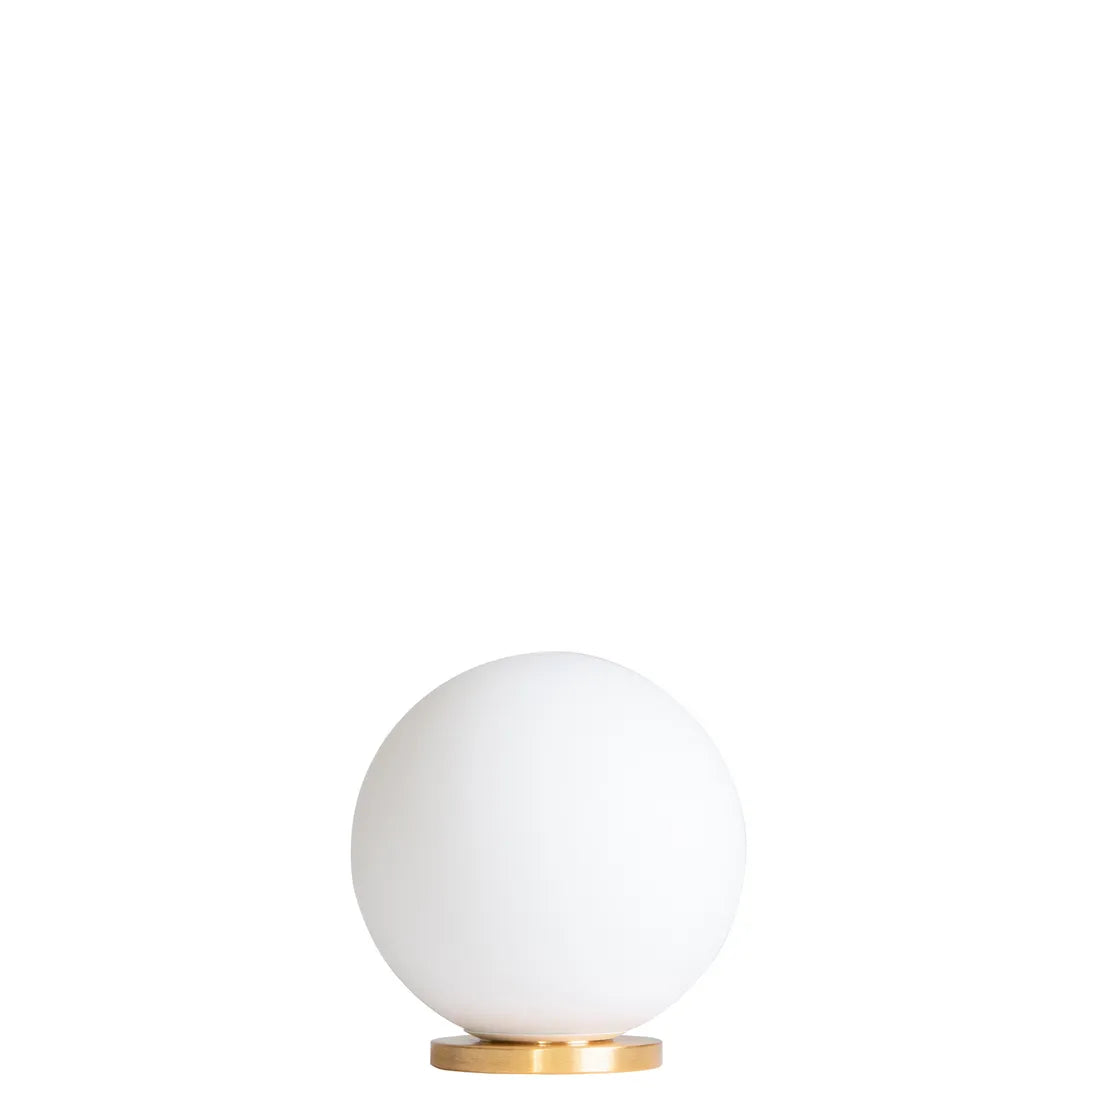 Round glass mini table lamps online India, Glass round small table lamps online India Store